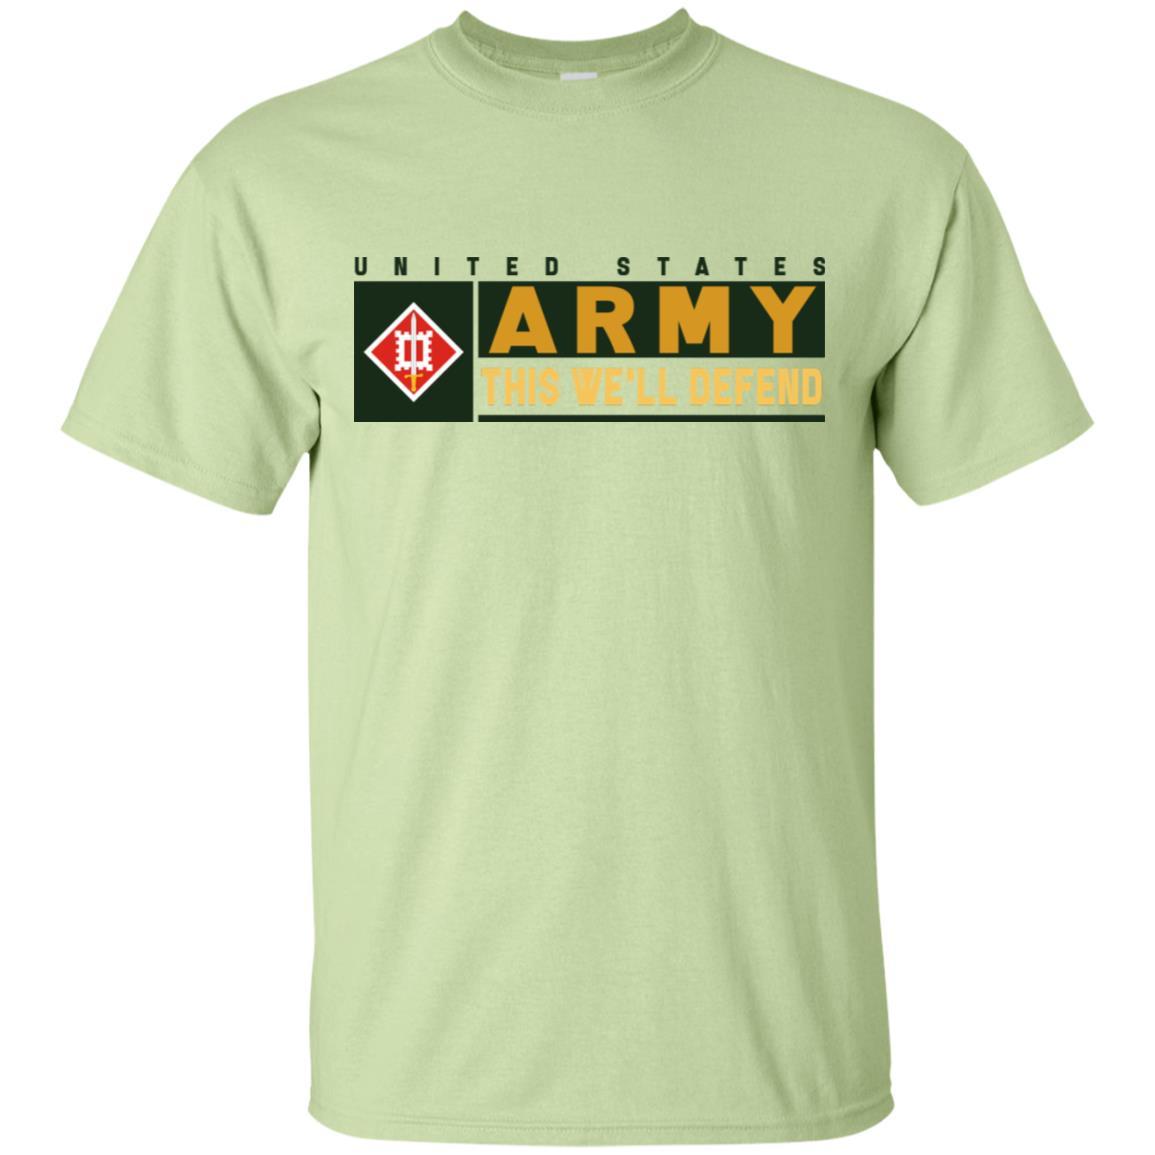 US Army 18TH ENGINEER BRIGADE- This We'll Defend T-Shirt On Front For Men-TShirt-Army-Veterans Nation